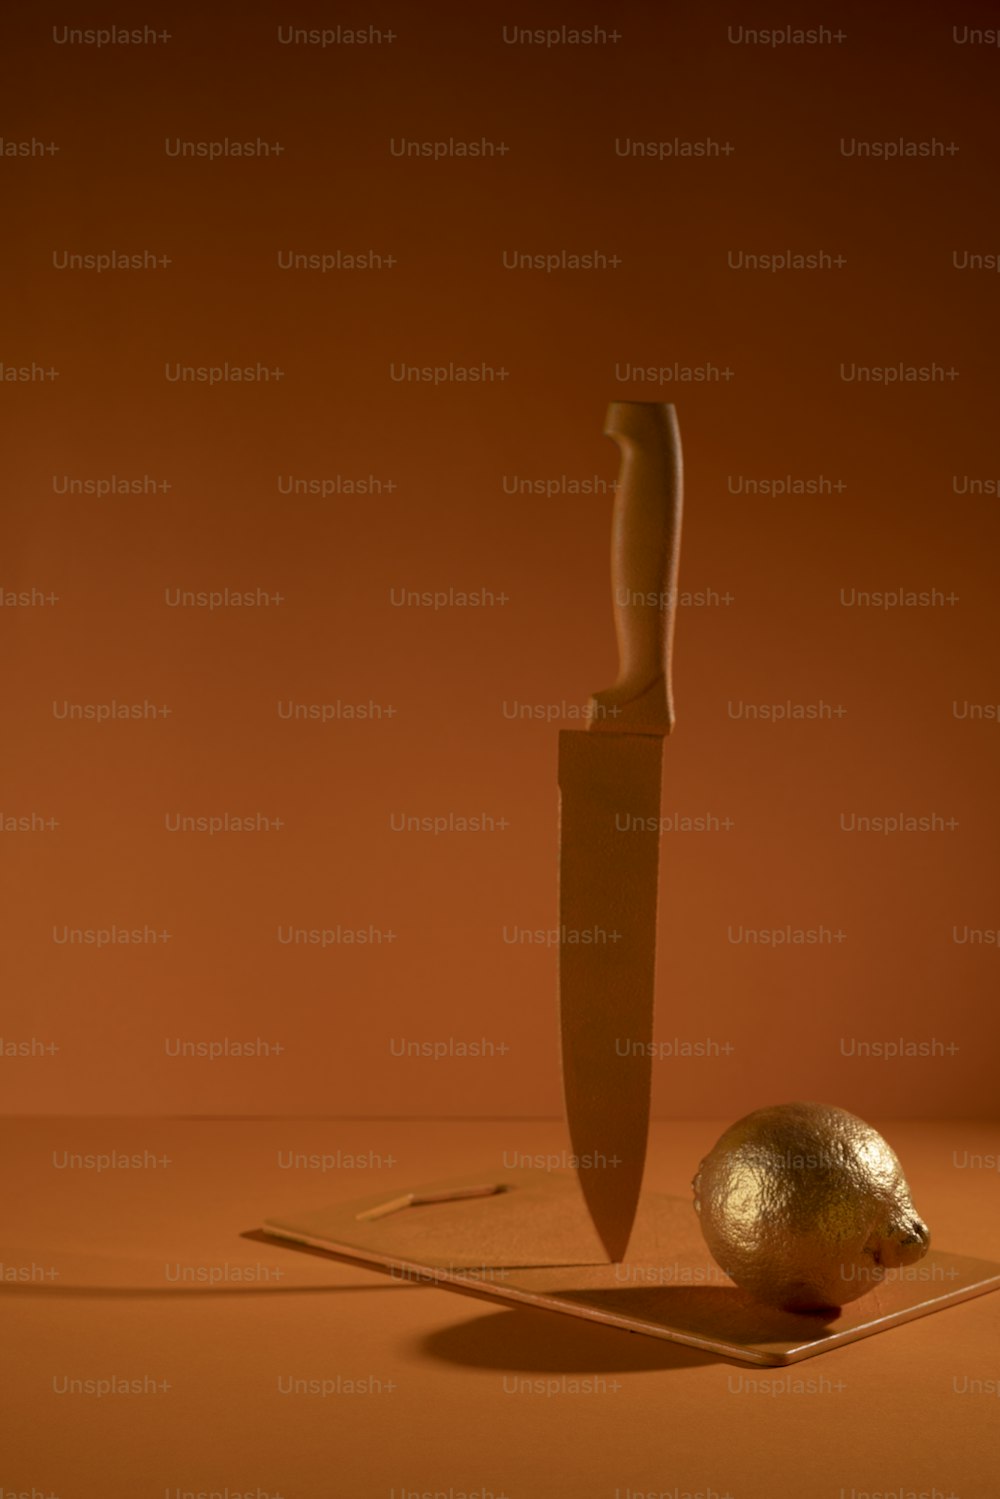 a knife and a golden egg on a table